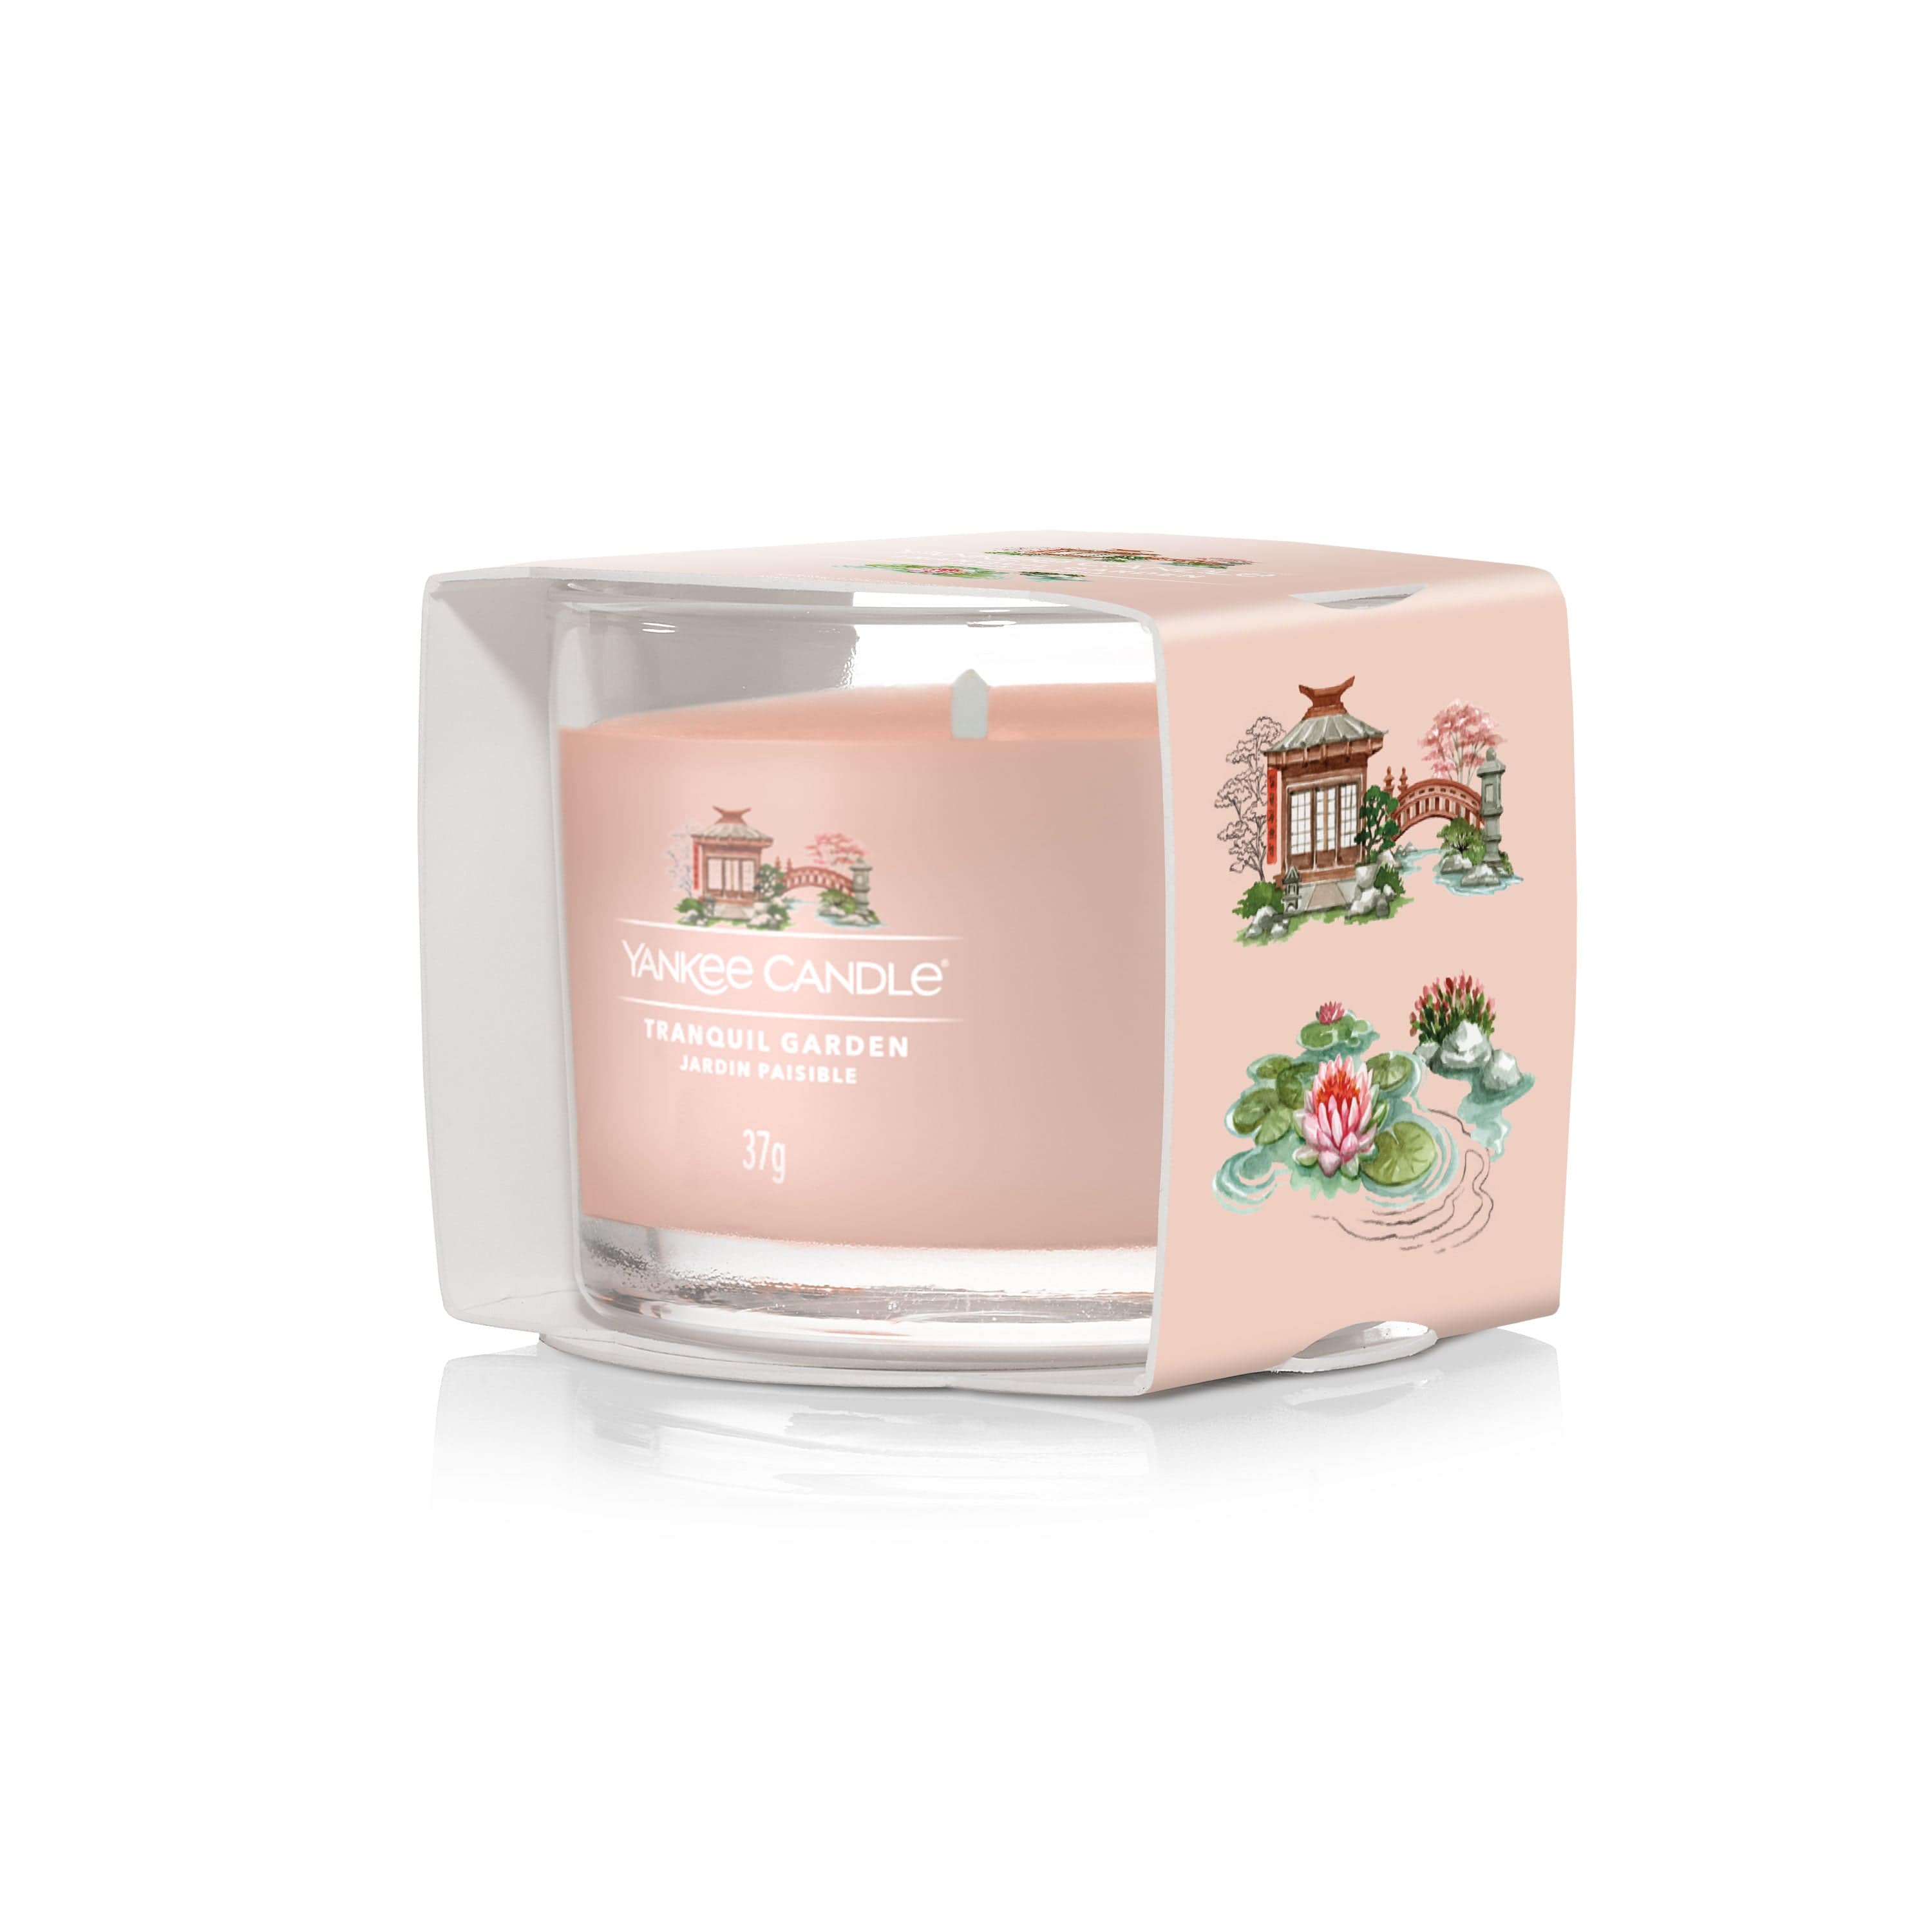 Yankee Candle Votive Candle Yankee Candle Filled Glass Votive - Tranquil Garden